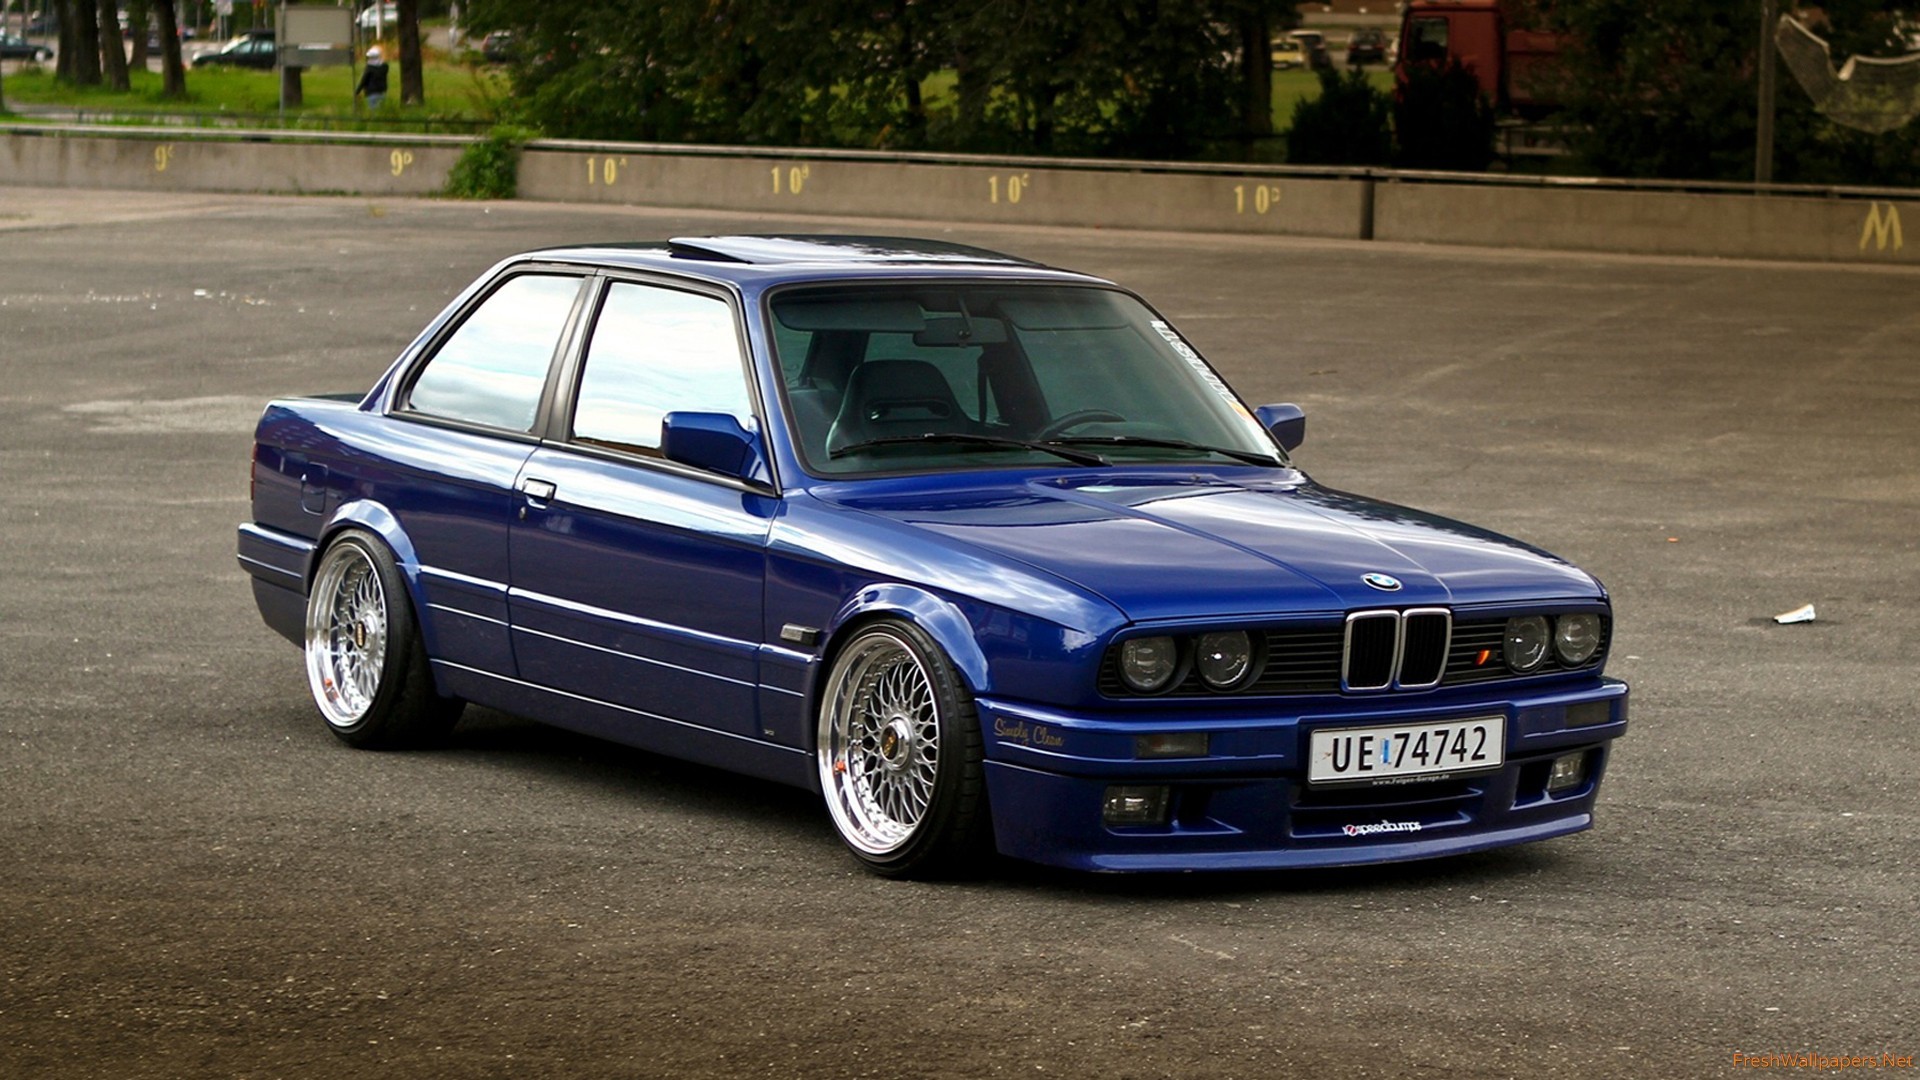 1920x1080 old bmw hd wallpapers cars picture bmw wallpaper